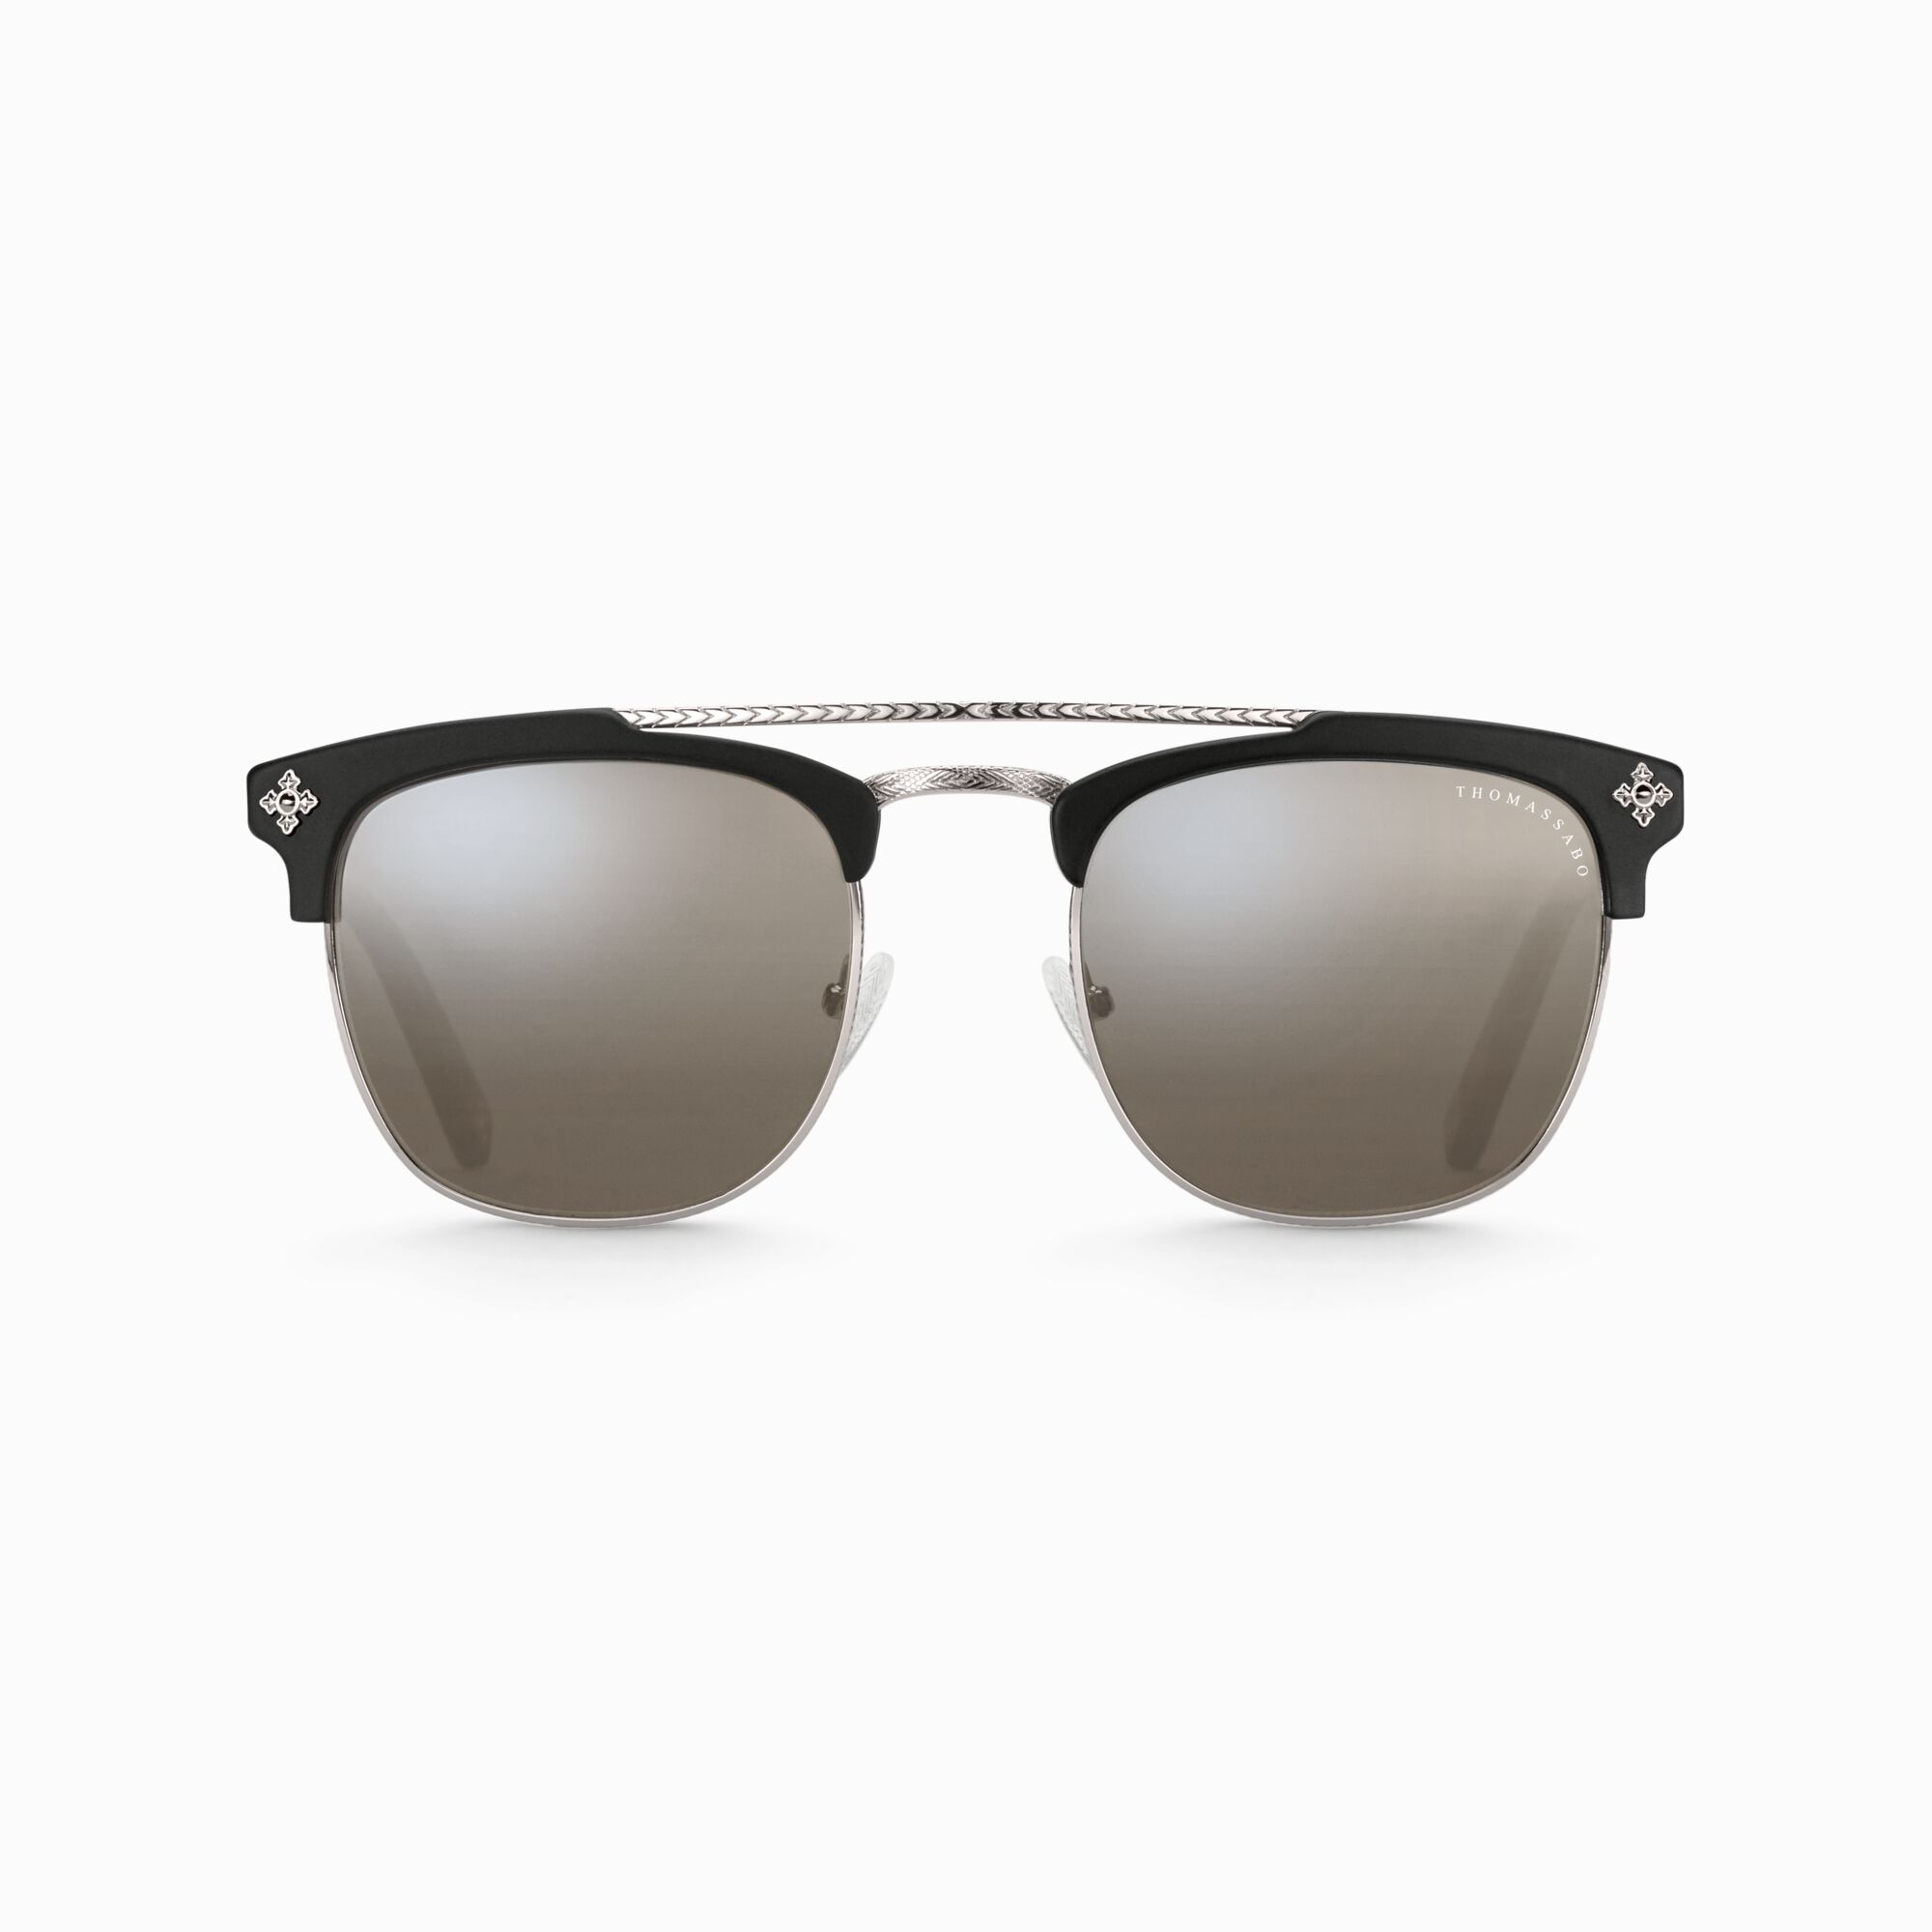 Sunglasses James trapeze cross mirrored from the  collection in the THOMAS SABO online store